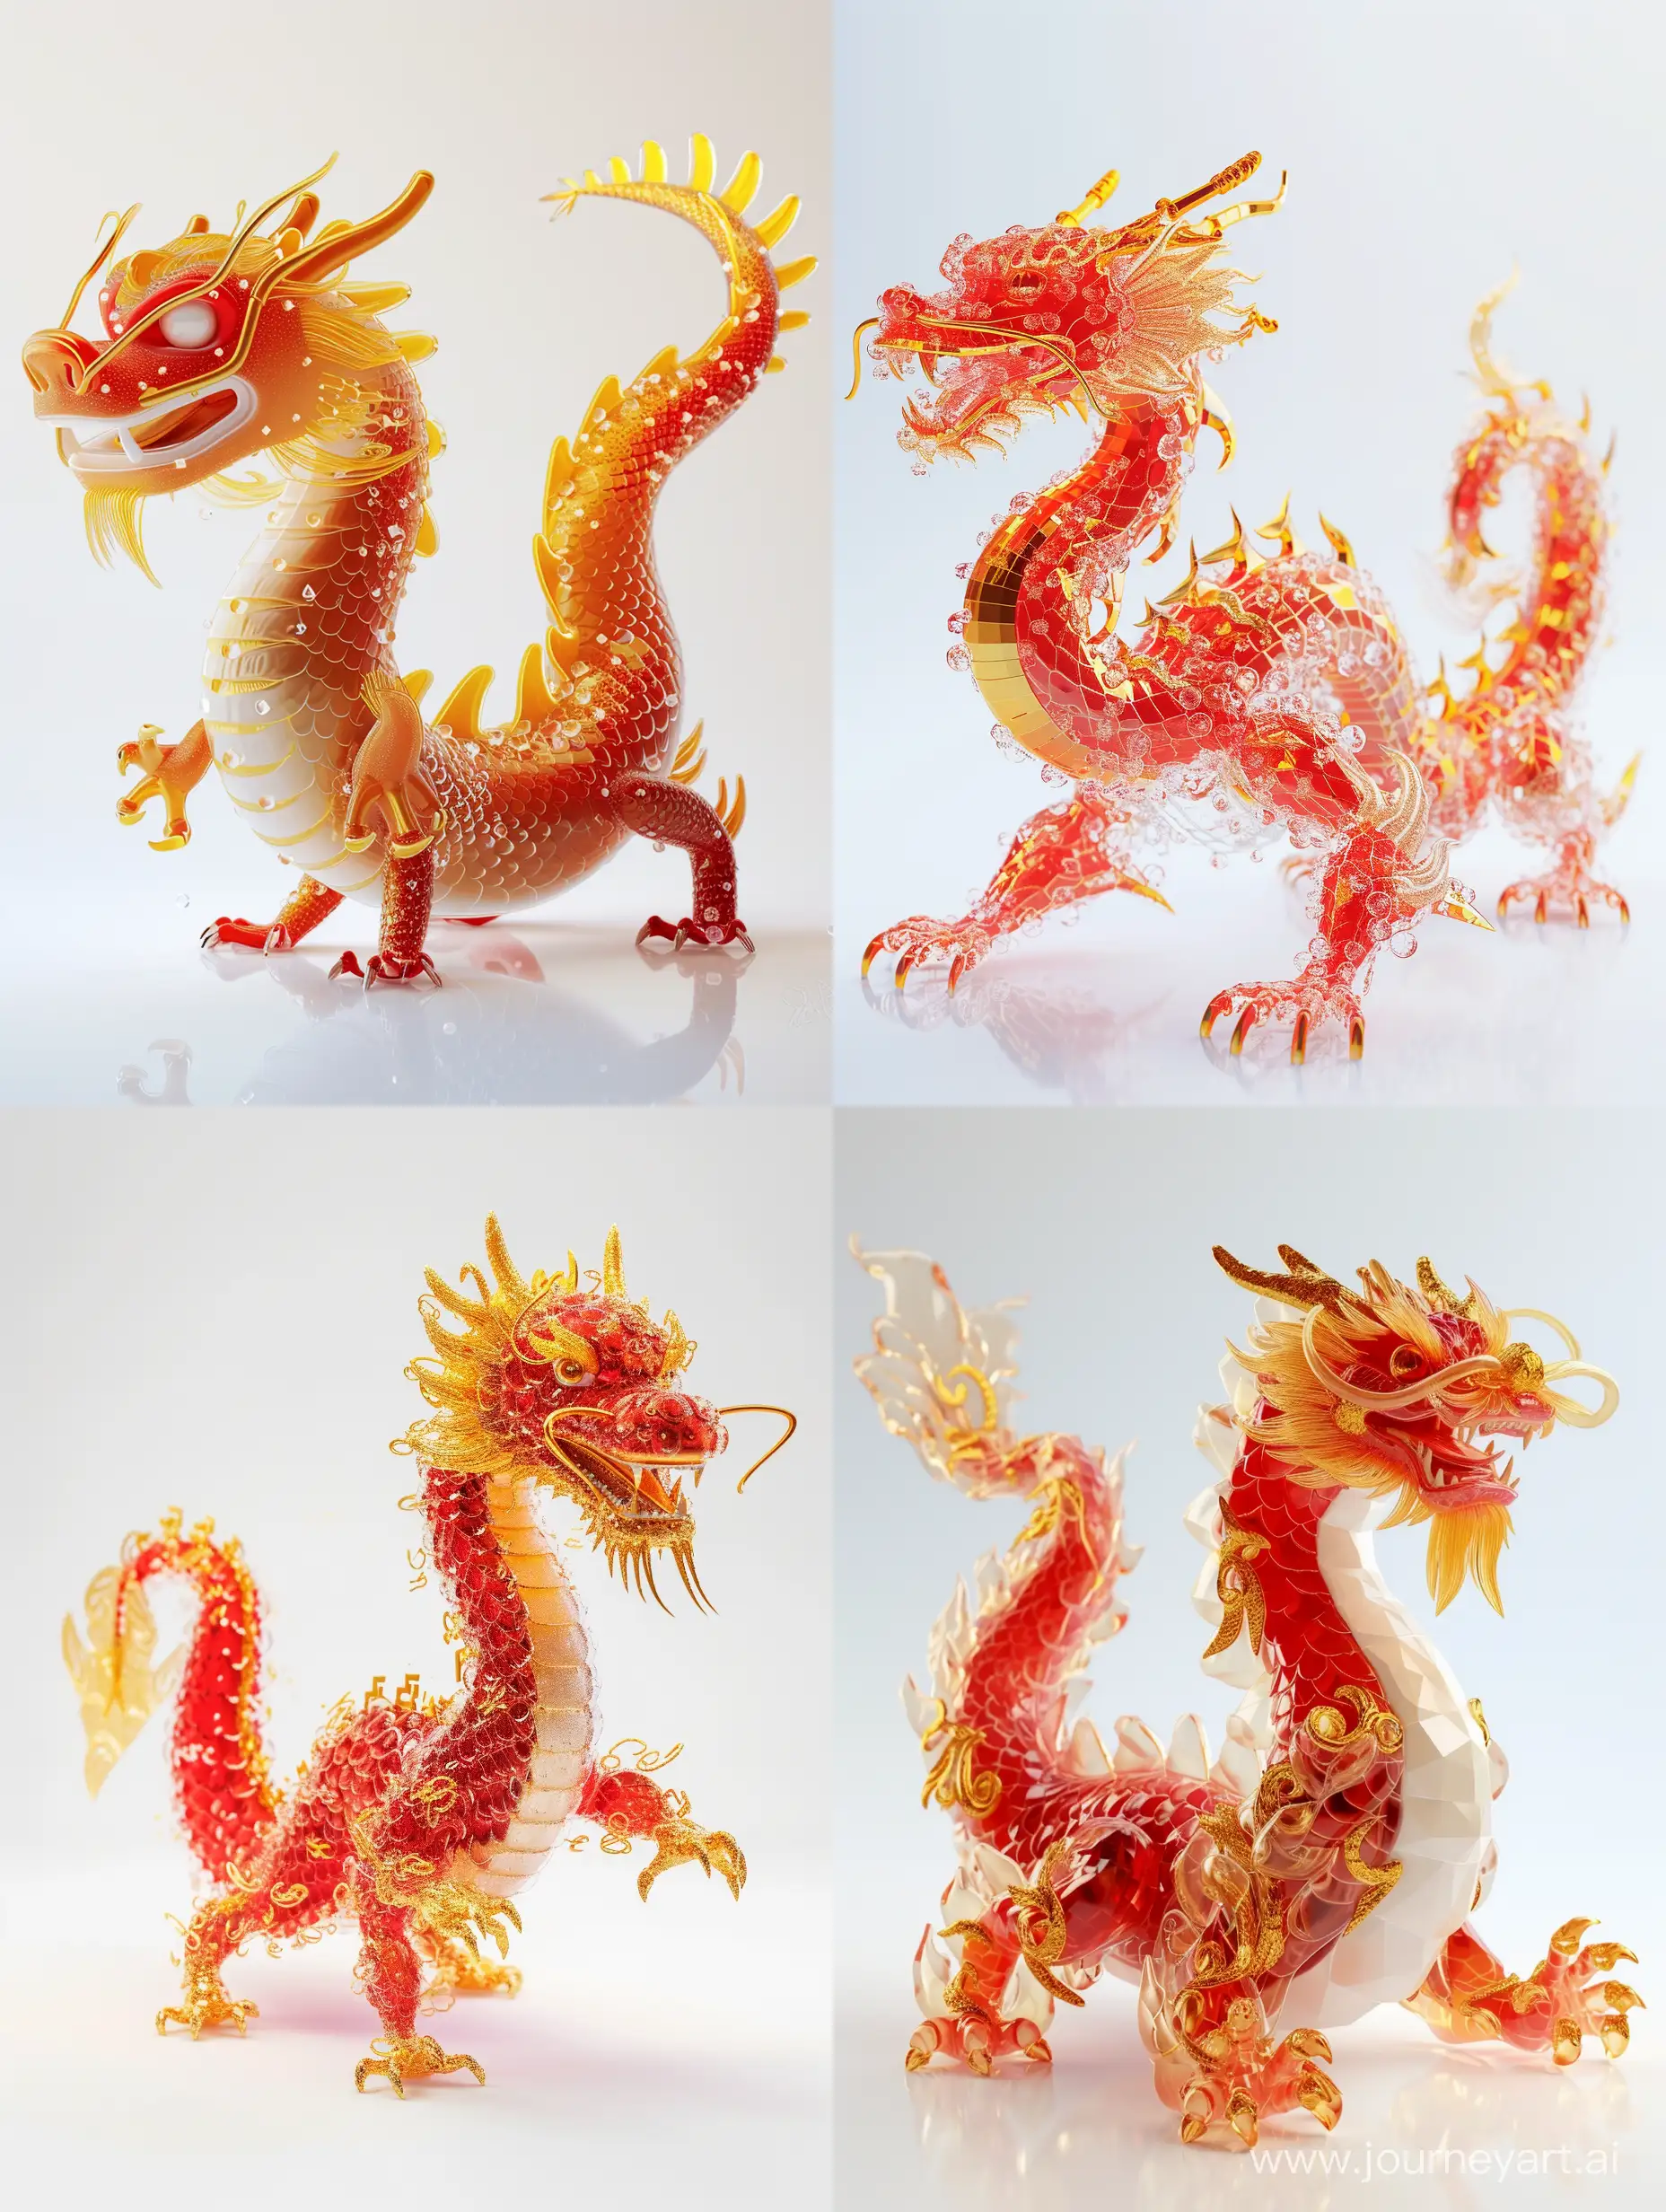 
portrait of A cute chinese dragon icon, full body, transparent material, red and golden, golden dragon horm, frosted glass, transparent technology sense, ui design, isometric, white background, studio lighting, bright color, 3d art, c4d, octane rendering, blender, ray tracing, pinterest, dribble, reduce details, 8k